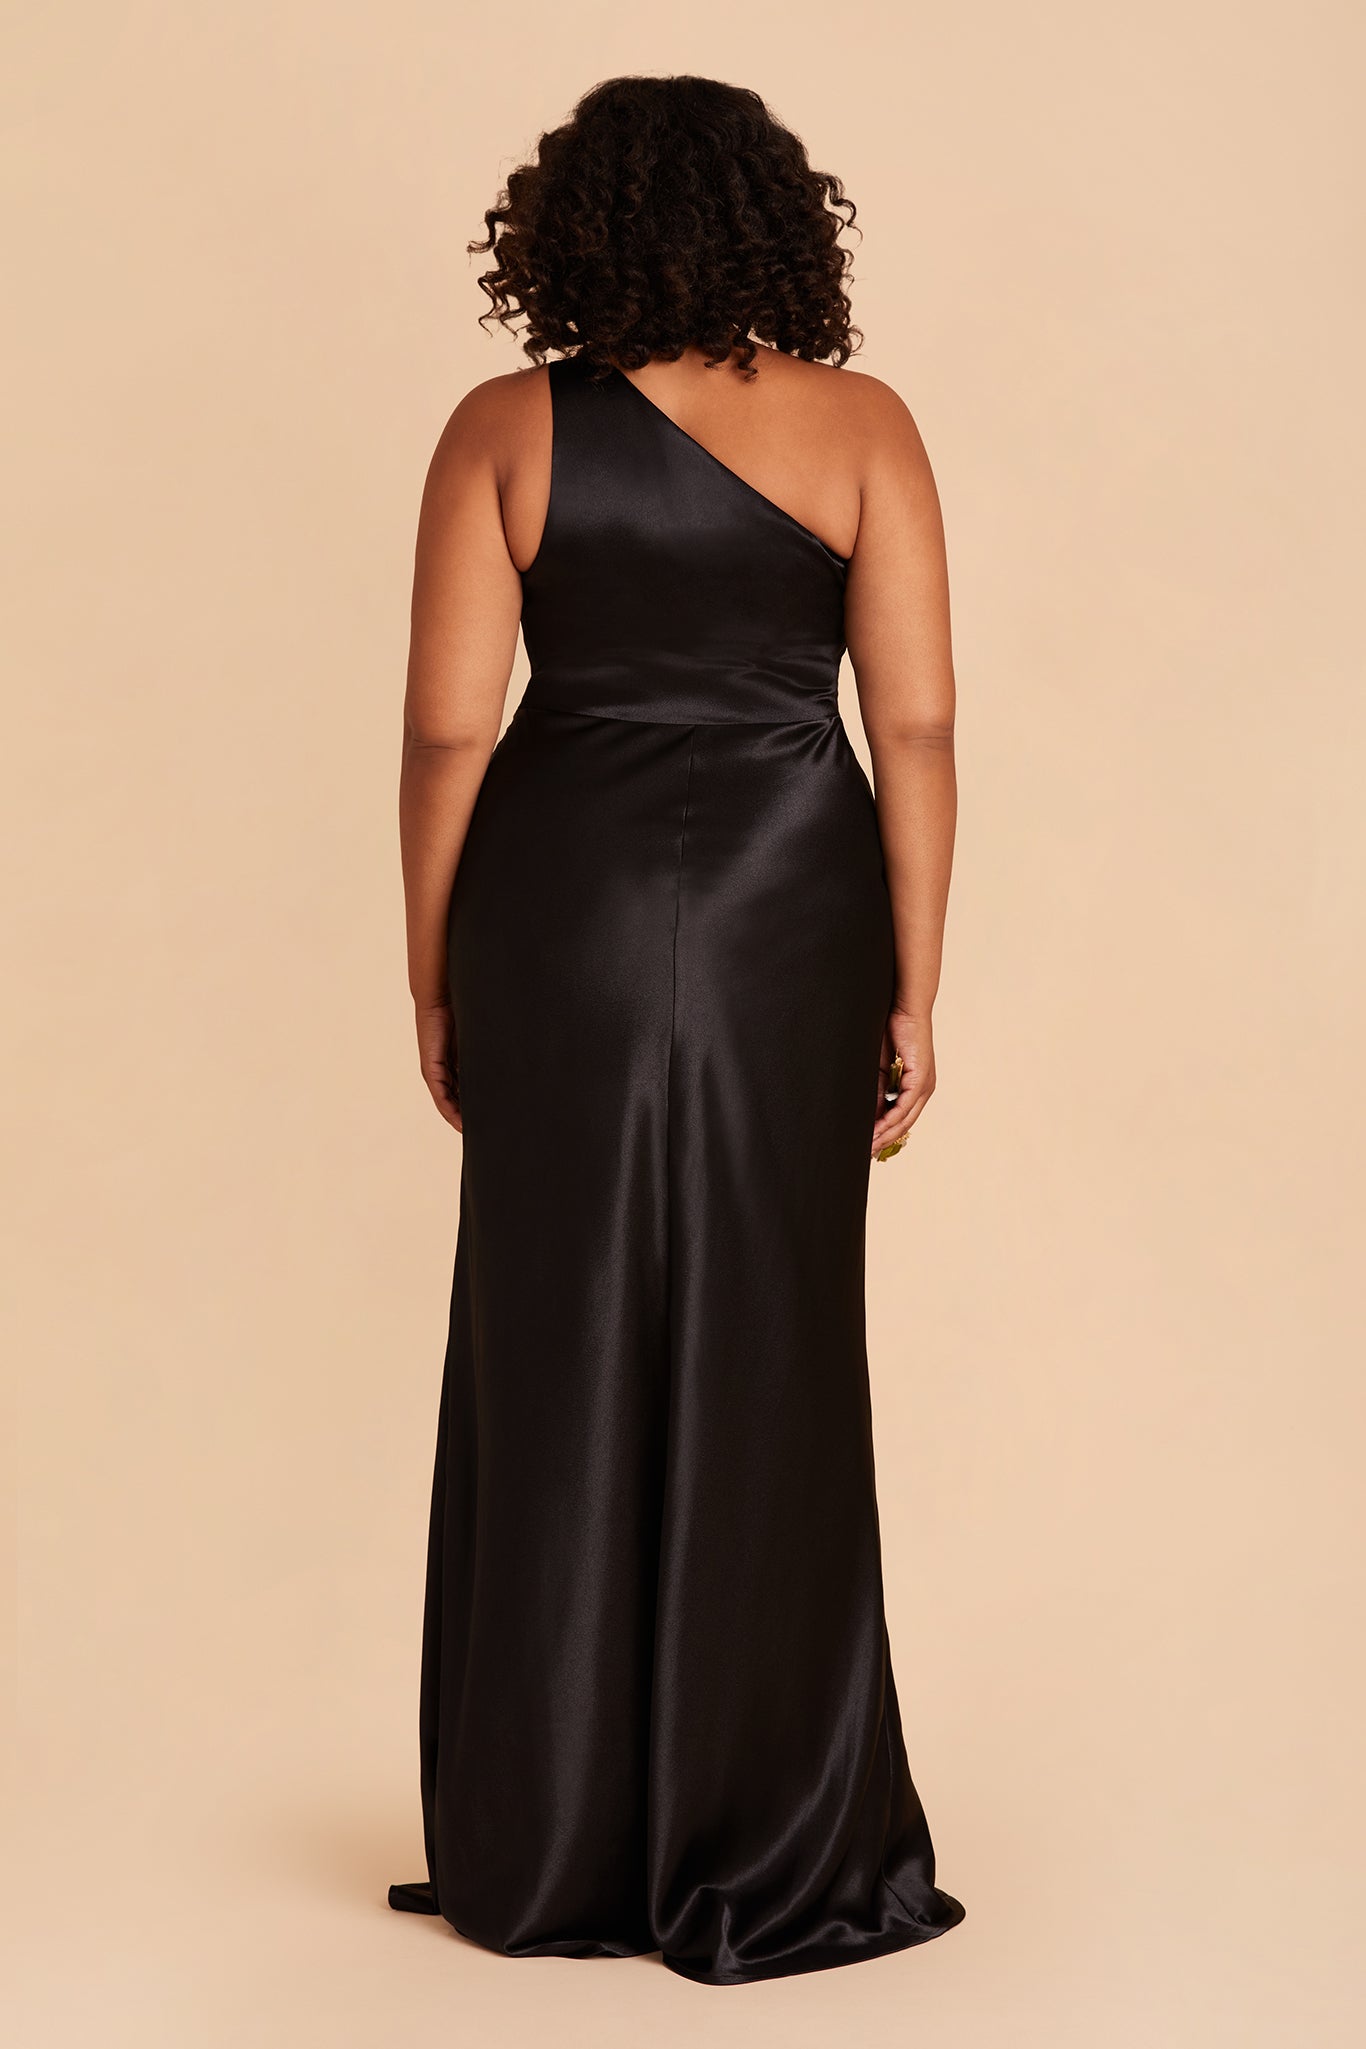 Kira plus size bridesmaid dress with slit in black satin by Birdy Grey, back view